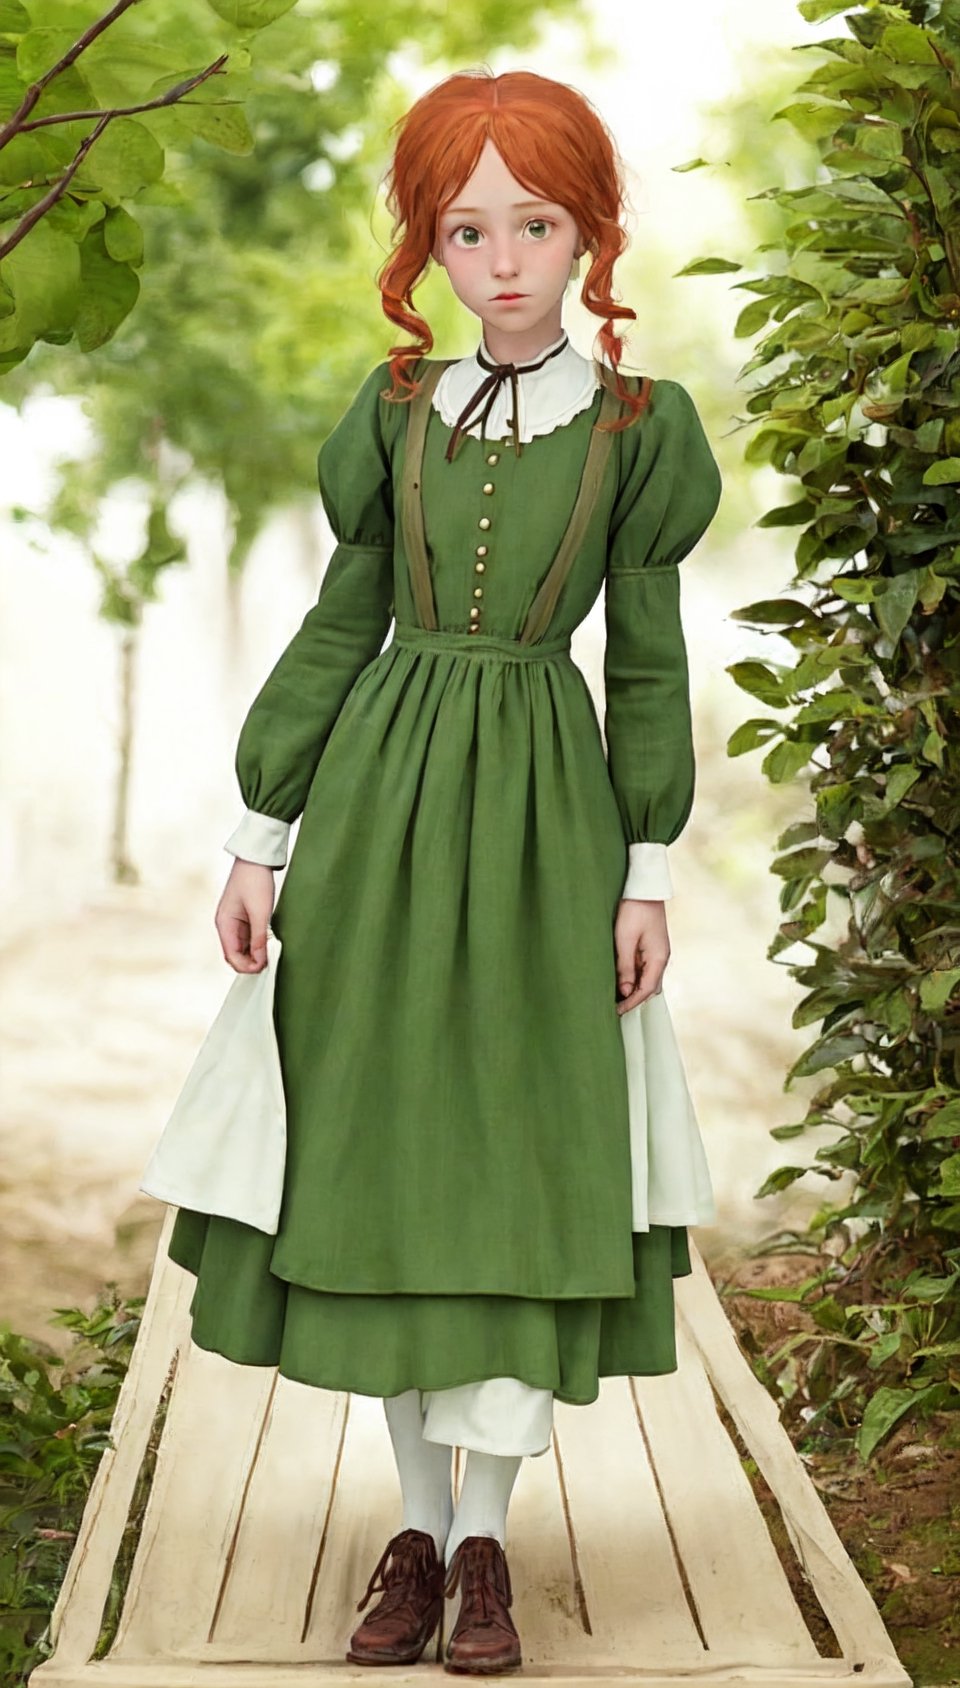 ginger girl, as 12  years old 1908 fashion , anne of green gables attire